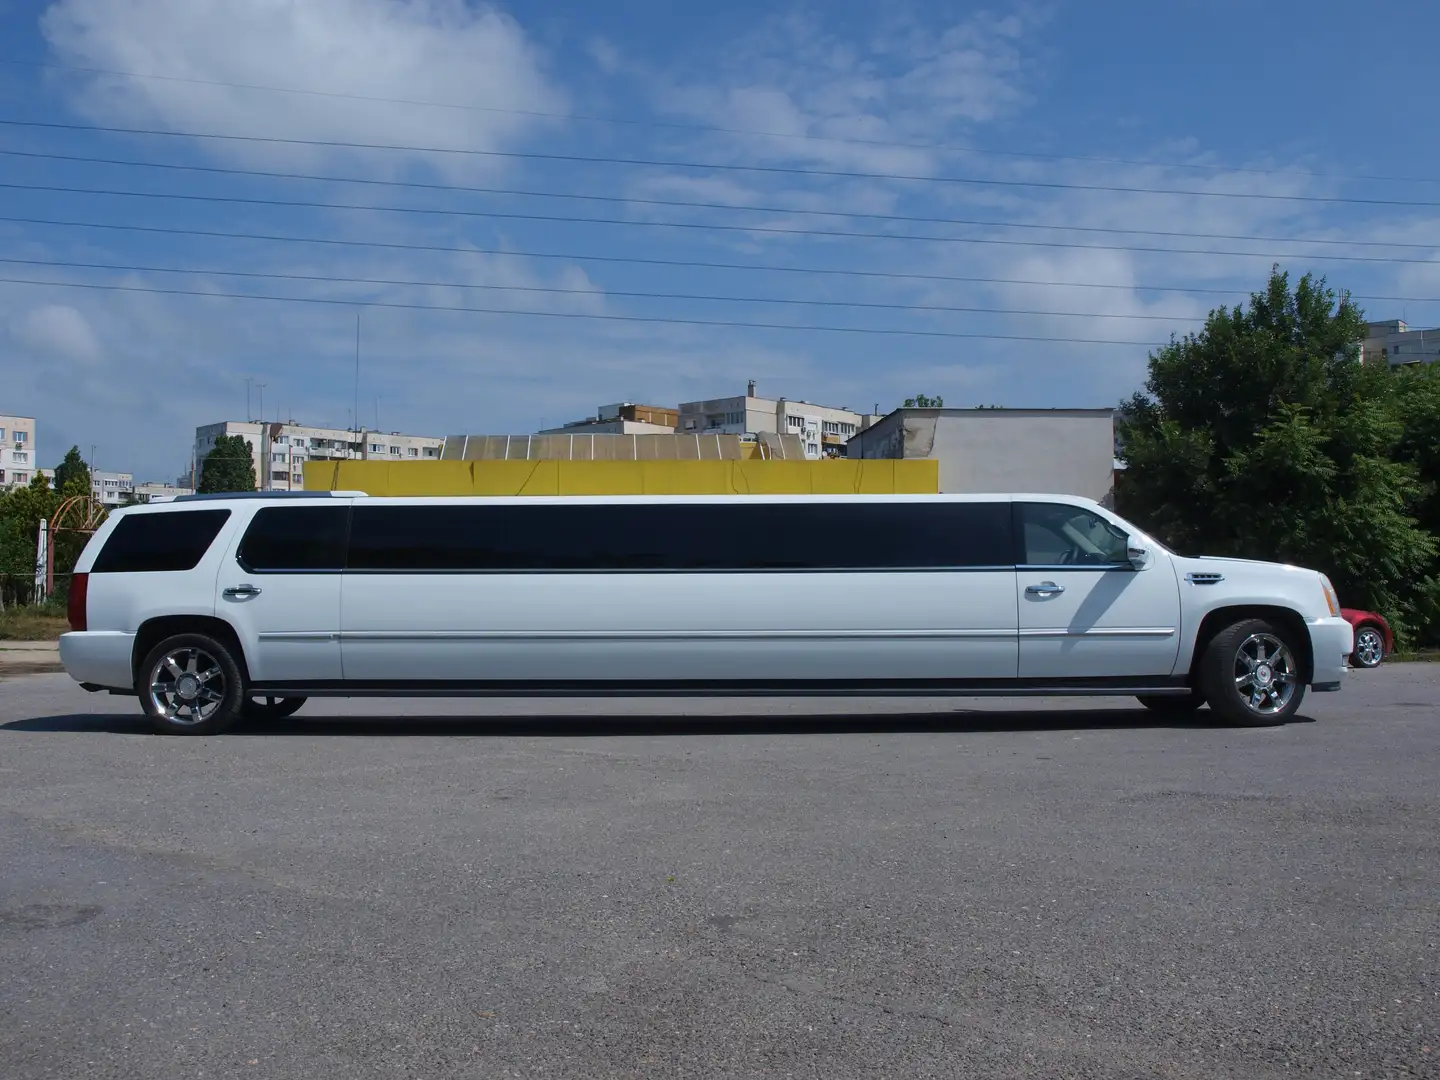 Cadillac Escalade 203-inch Stretch Limousine by Moonlight Industries Wit - 2